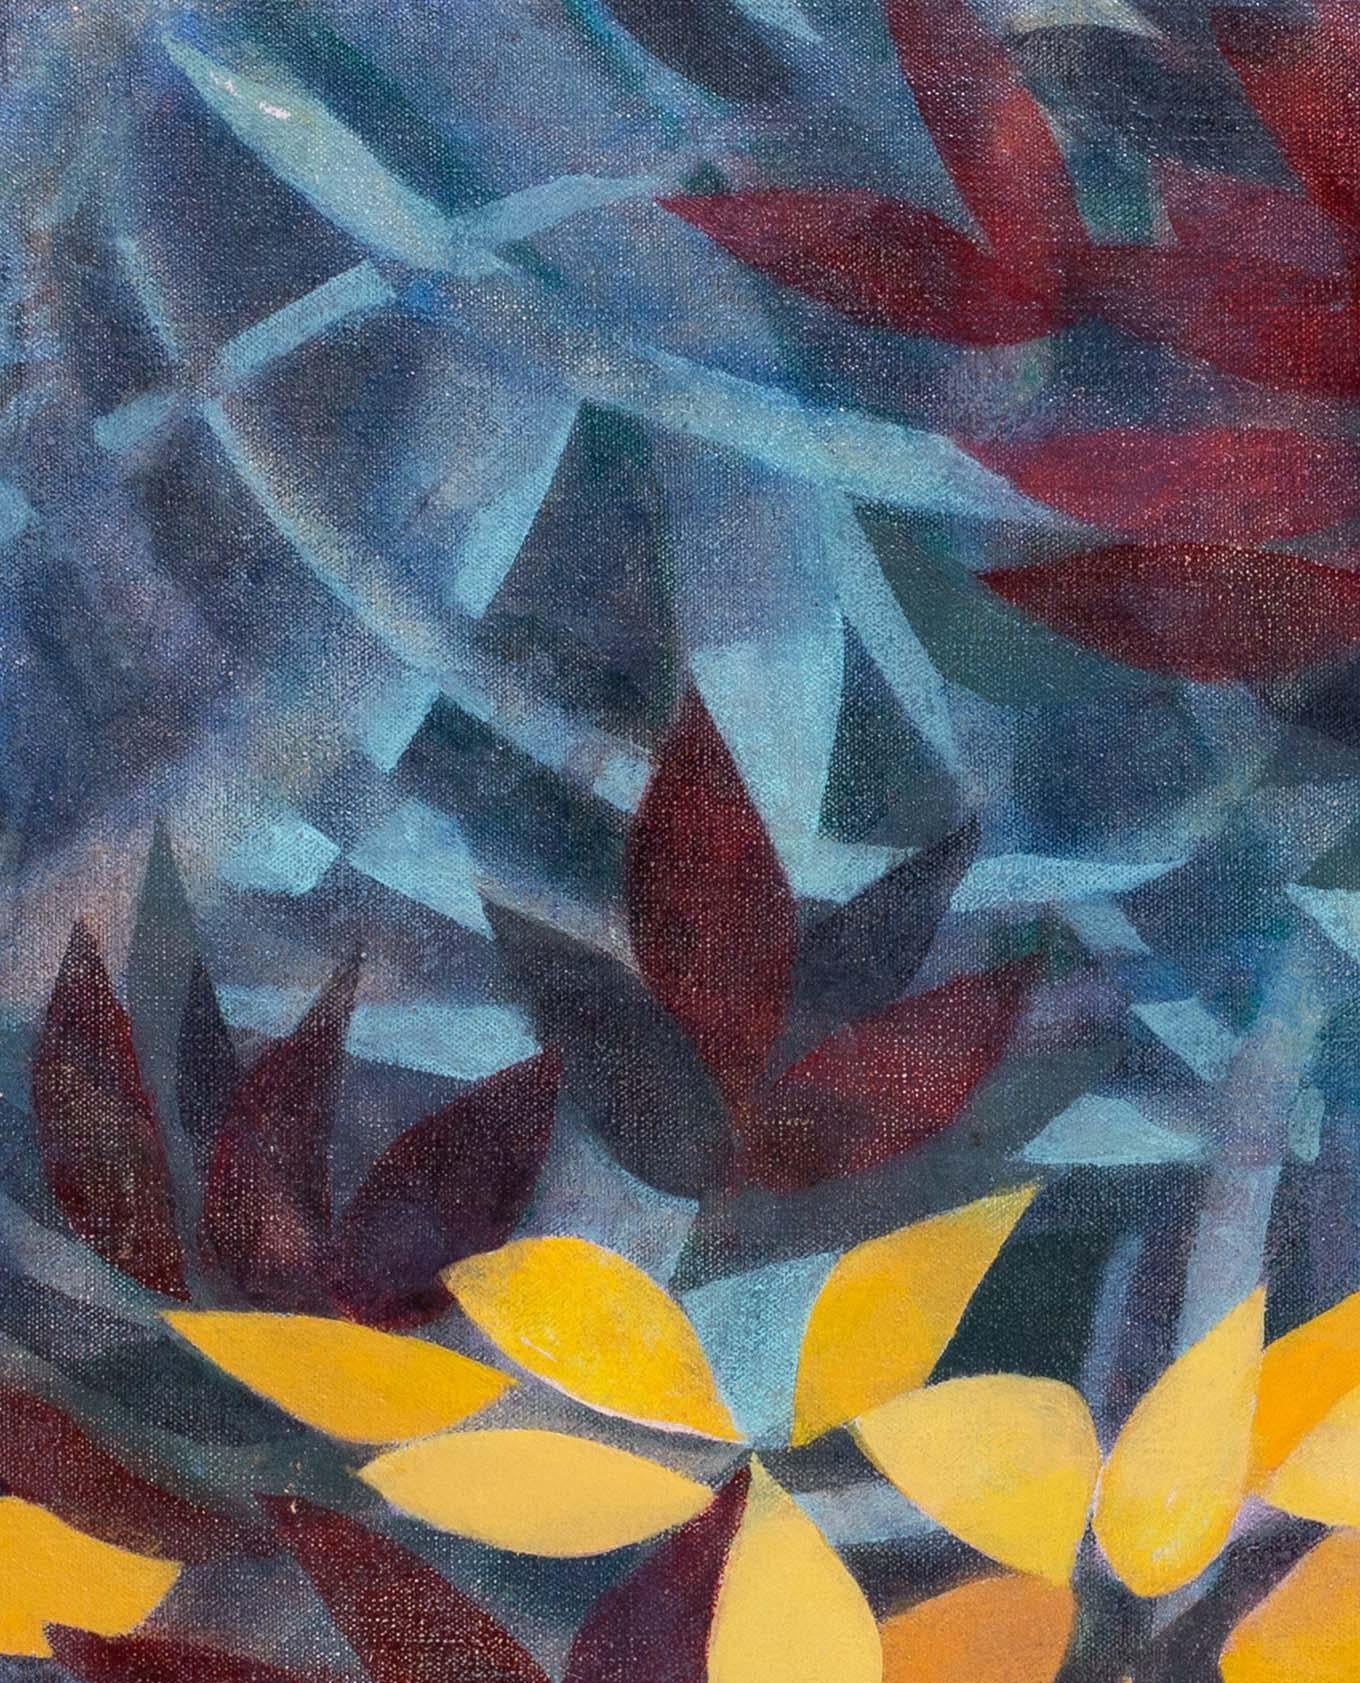 20th Century Slovakian oil painting of autumn leaves - Abstract Painting by Julius Tabacek